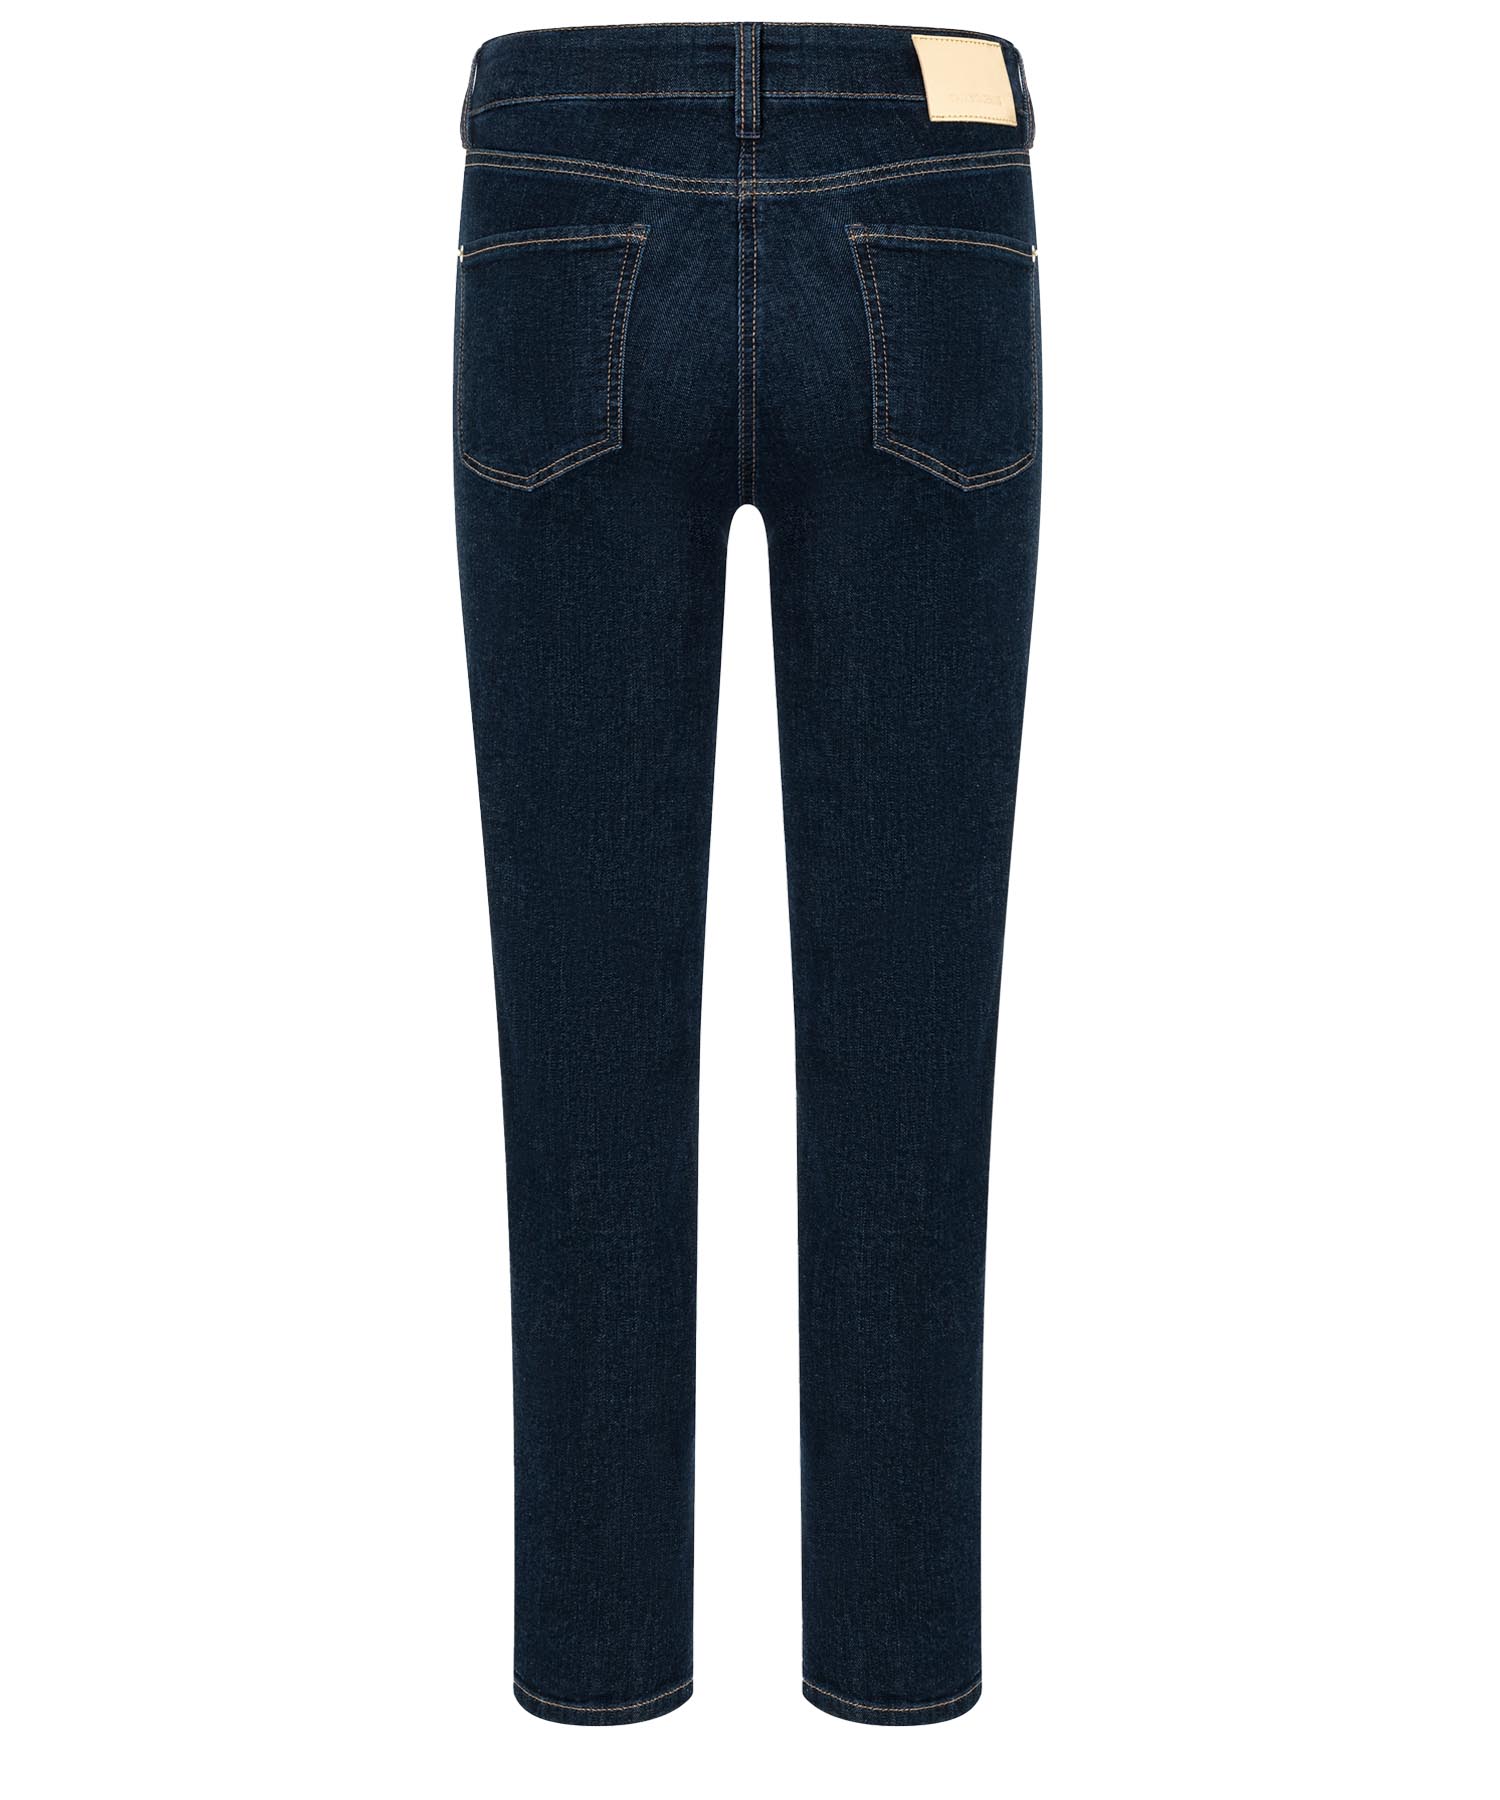 Cambio Jeans Piper cropped in dunkelblauer Waschung